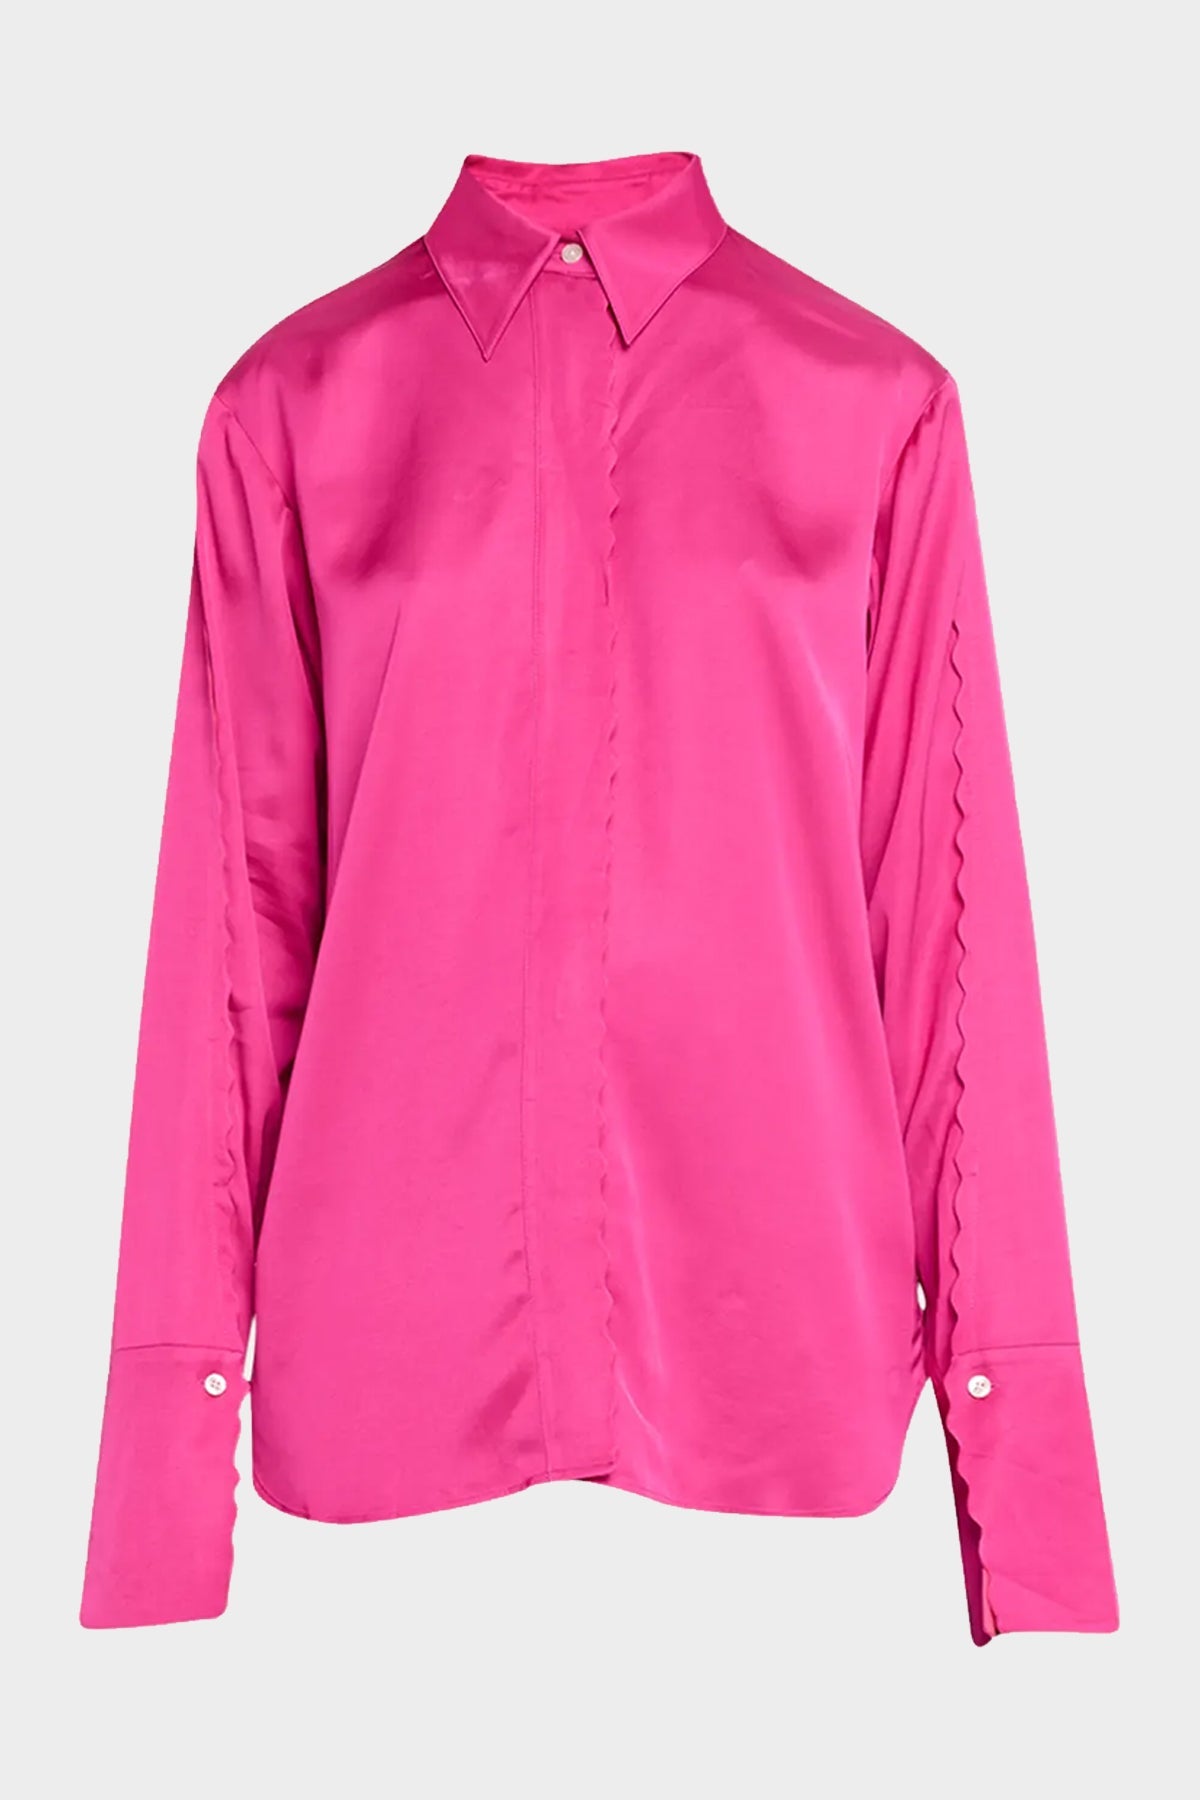 Haven Scalloped Satin Top in Disco Pink - shop-olivia.com